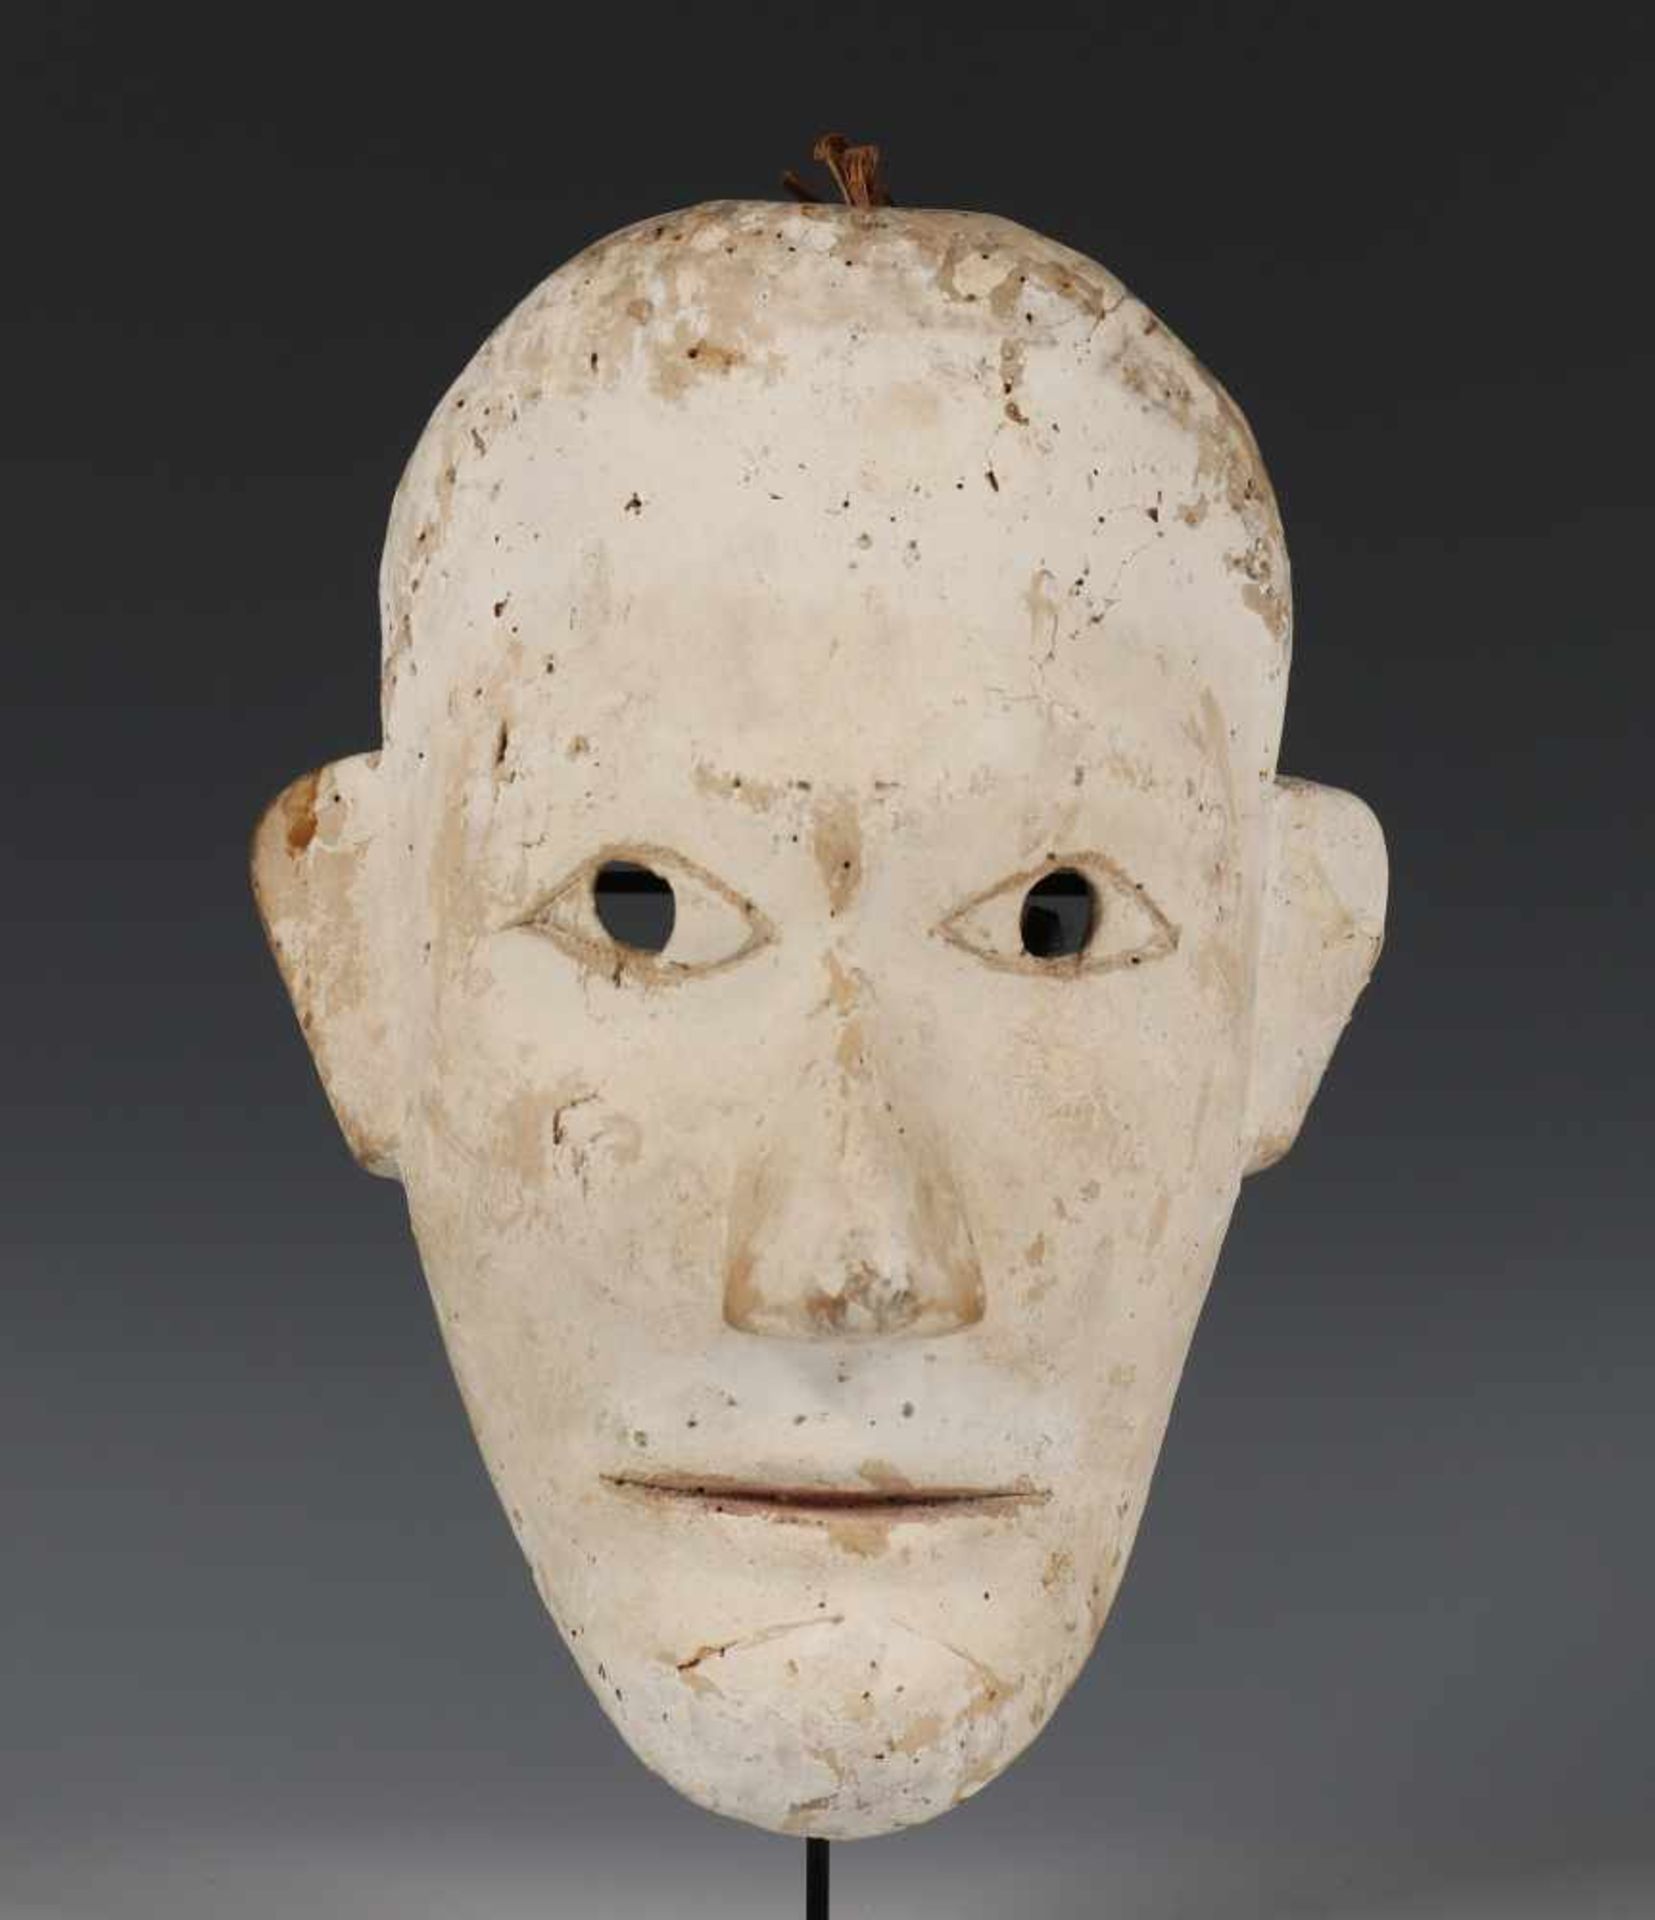 Borneo, Iban Dayak, white pigmented hunters mask, ca. 1920with layers of kaolin, plantfiber bindings